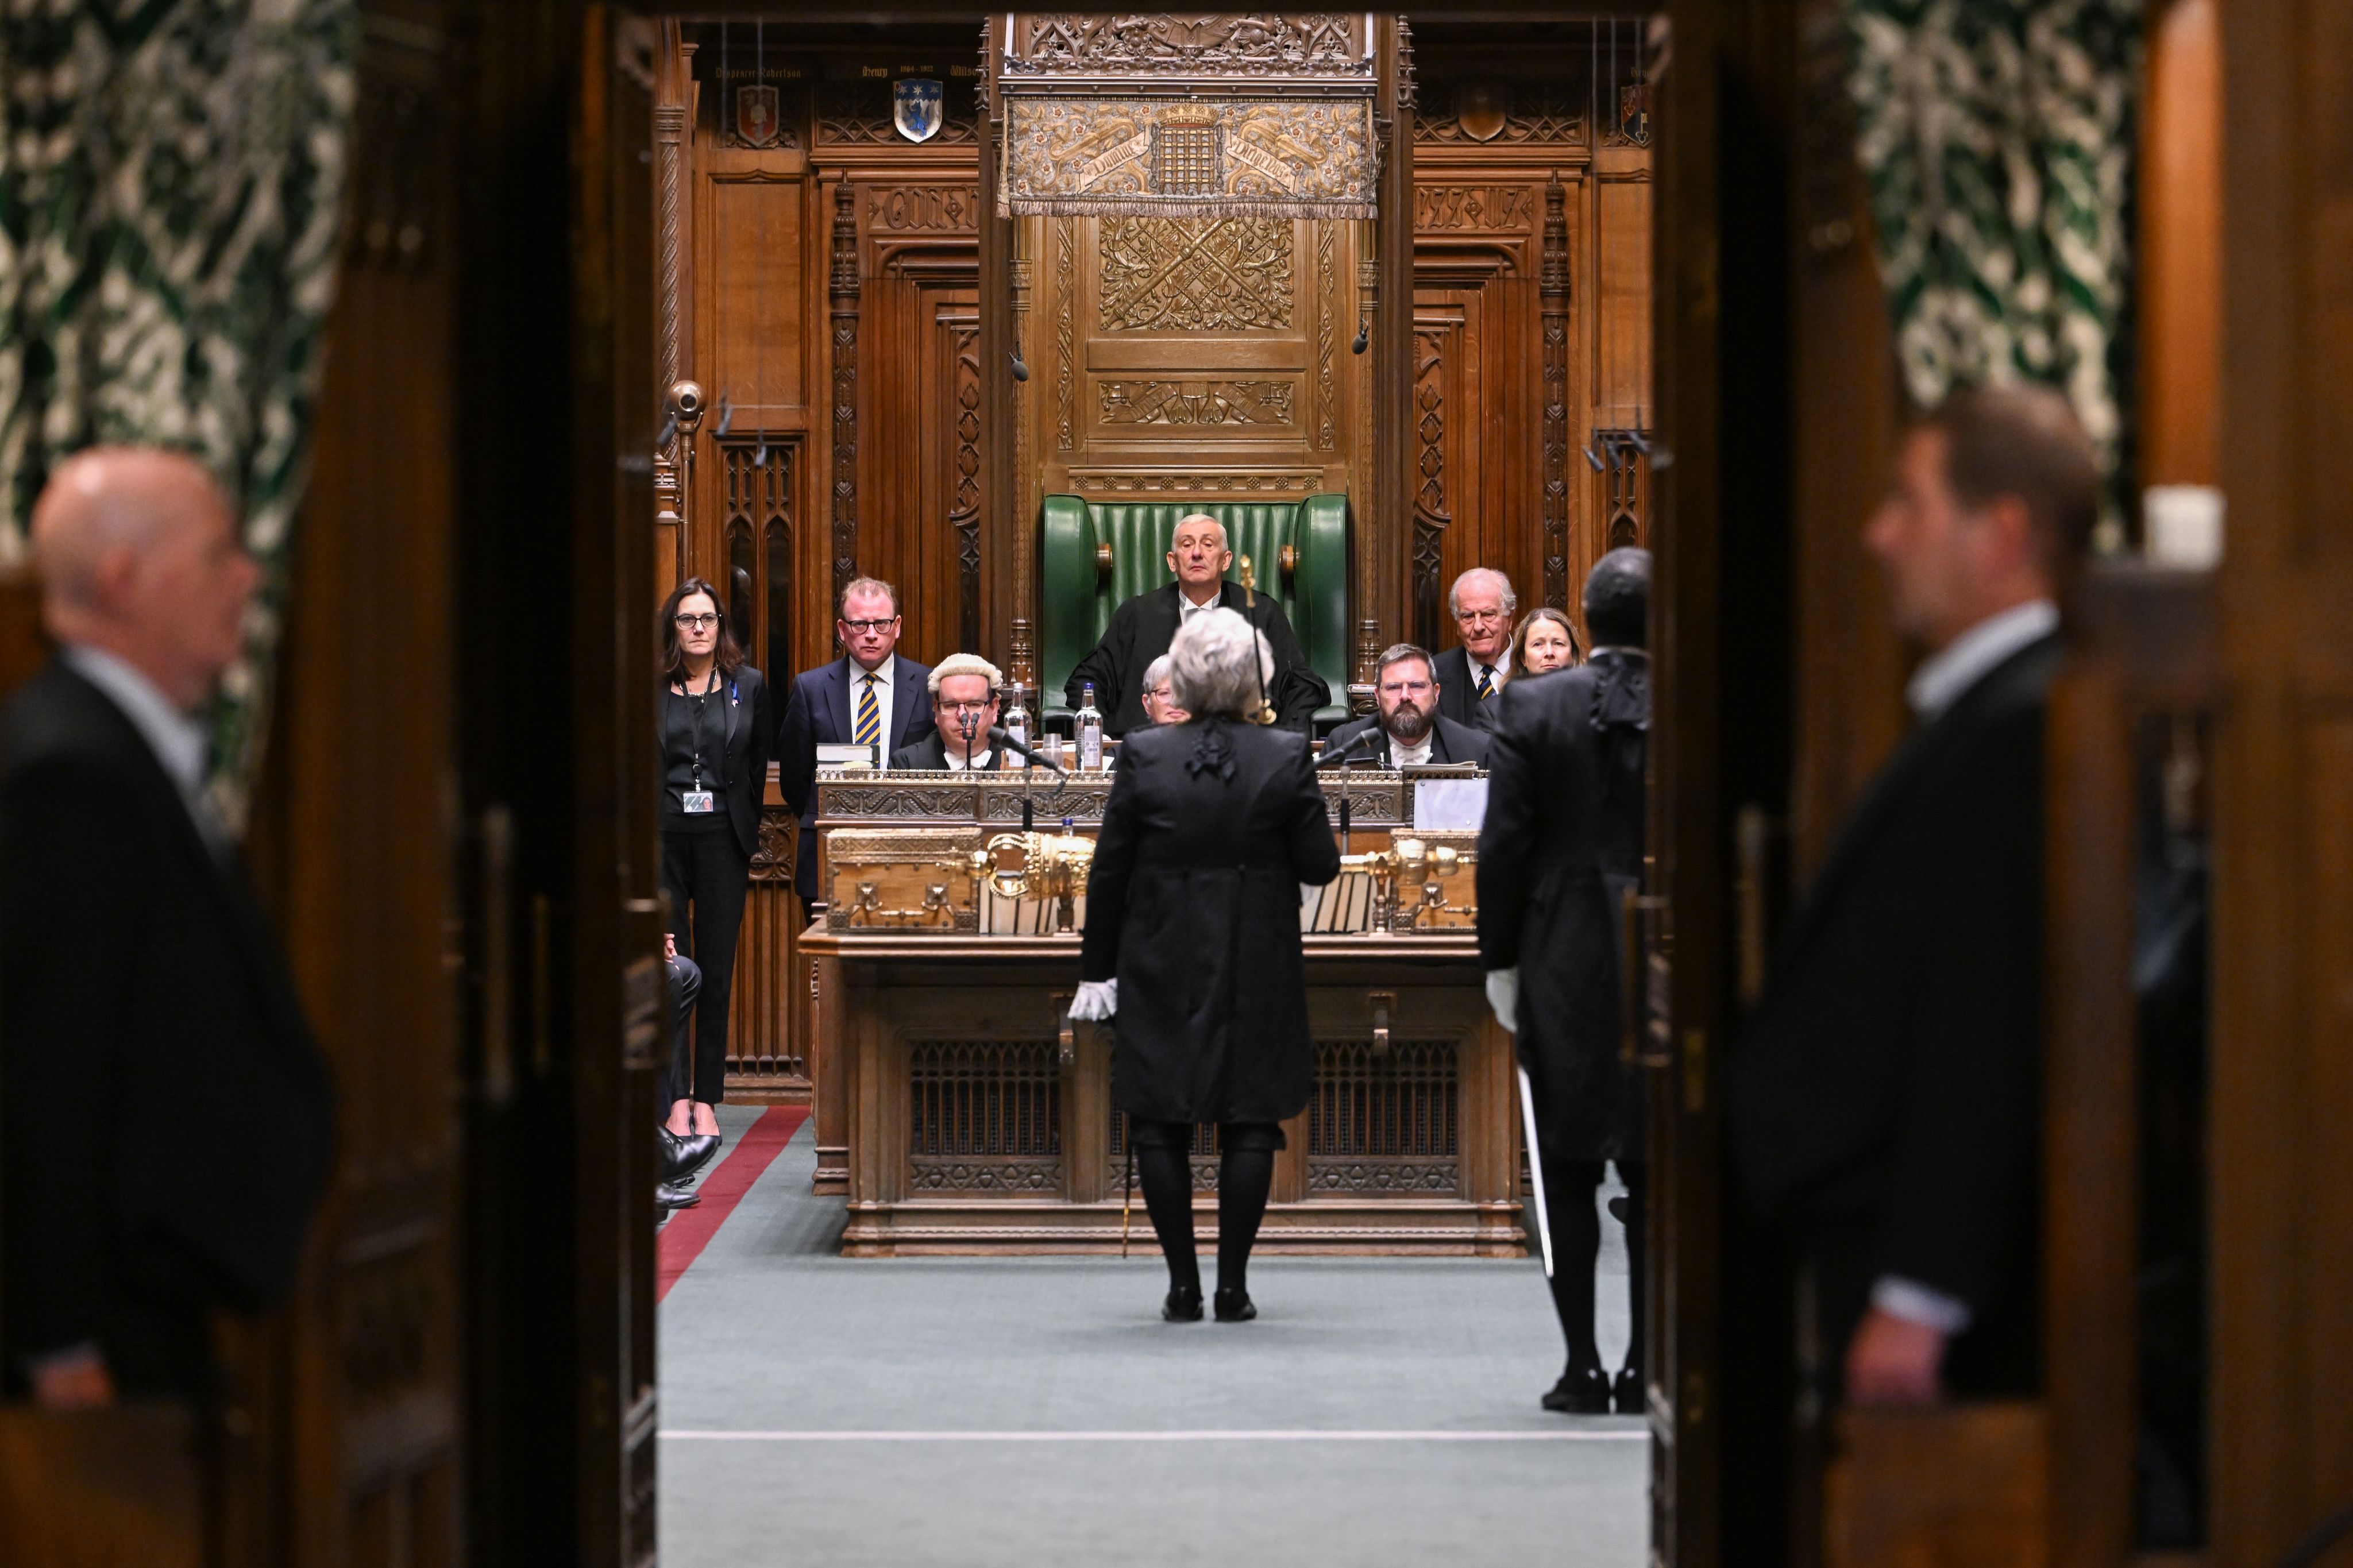 Mr Speaker and Black Rod in the House of Common Chamber.